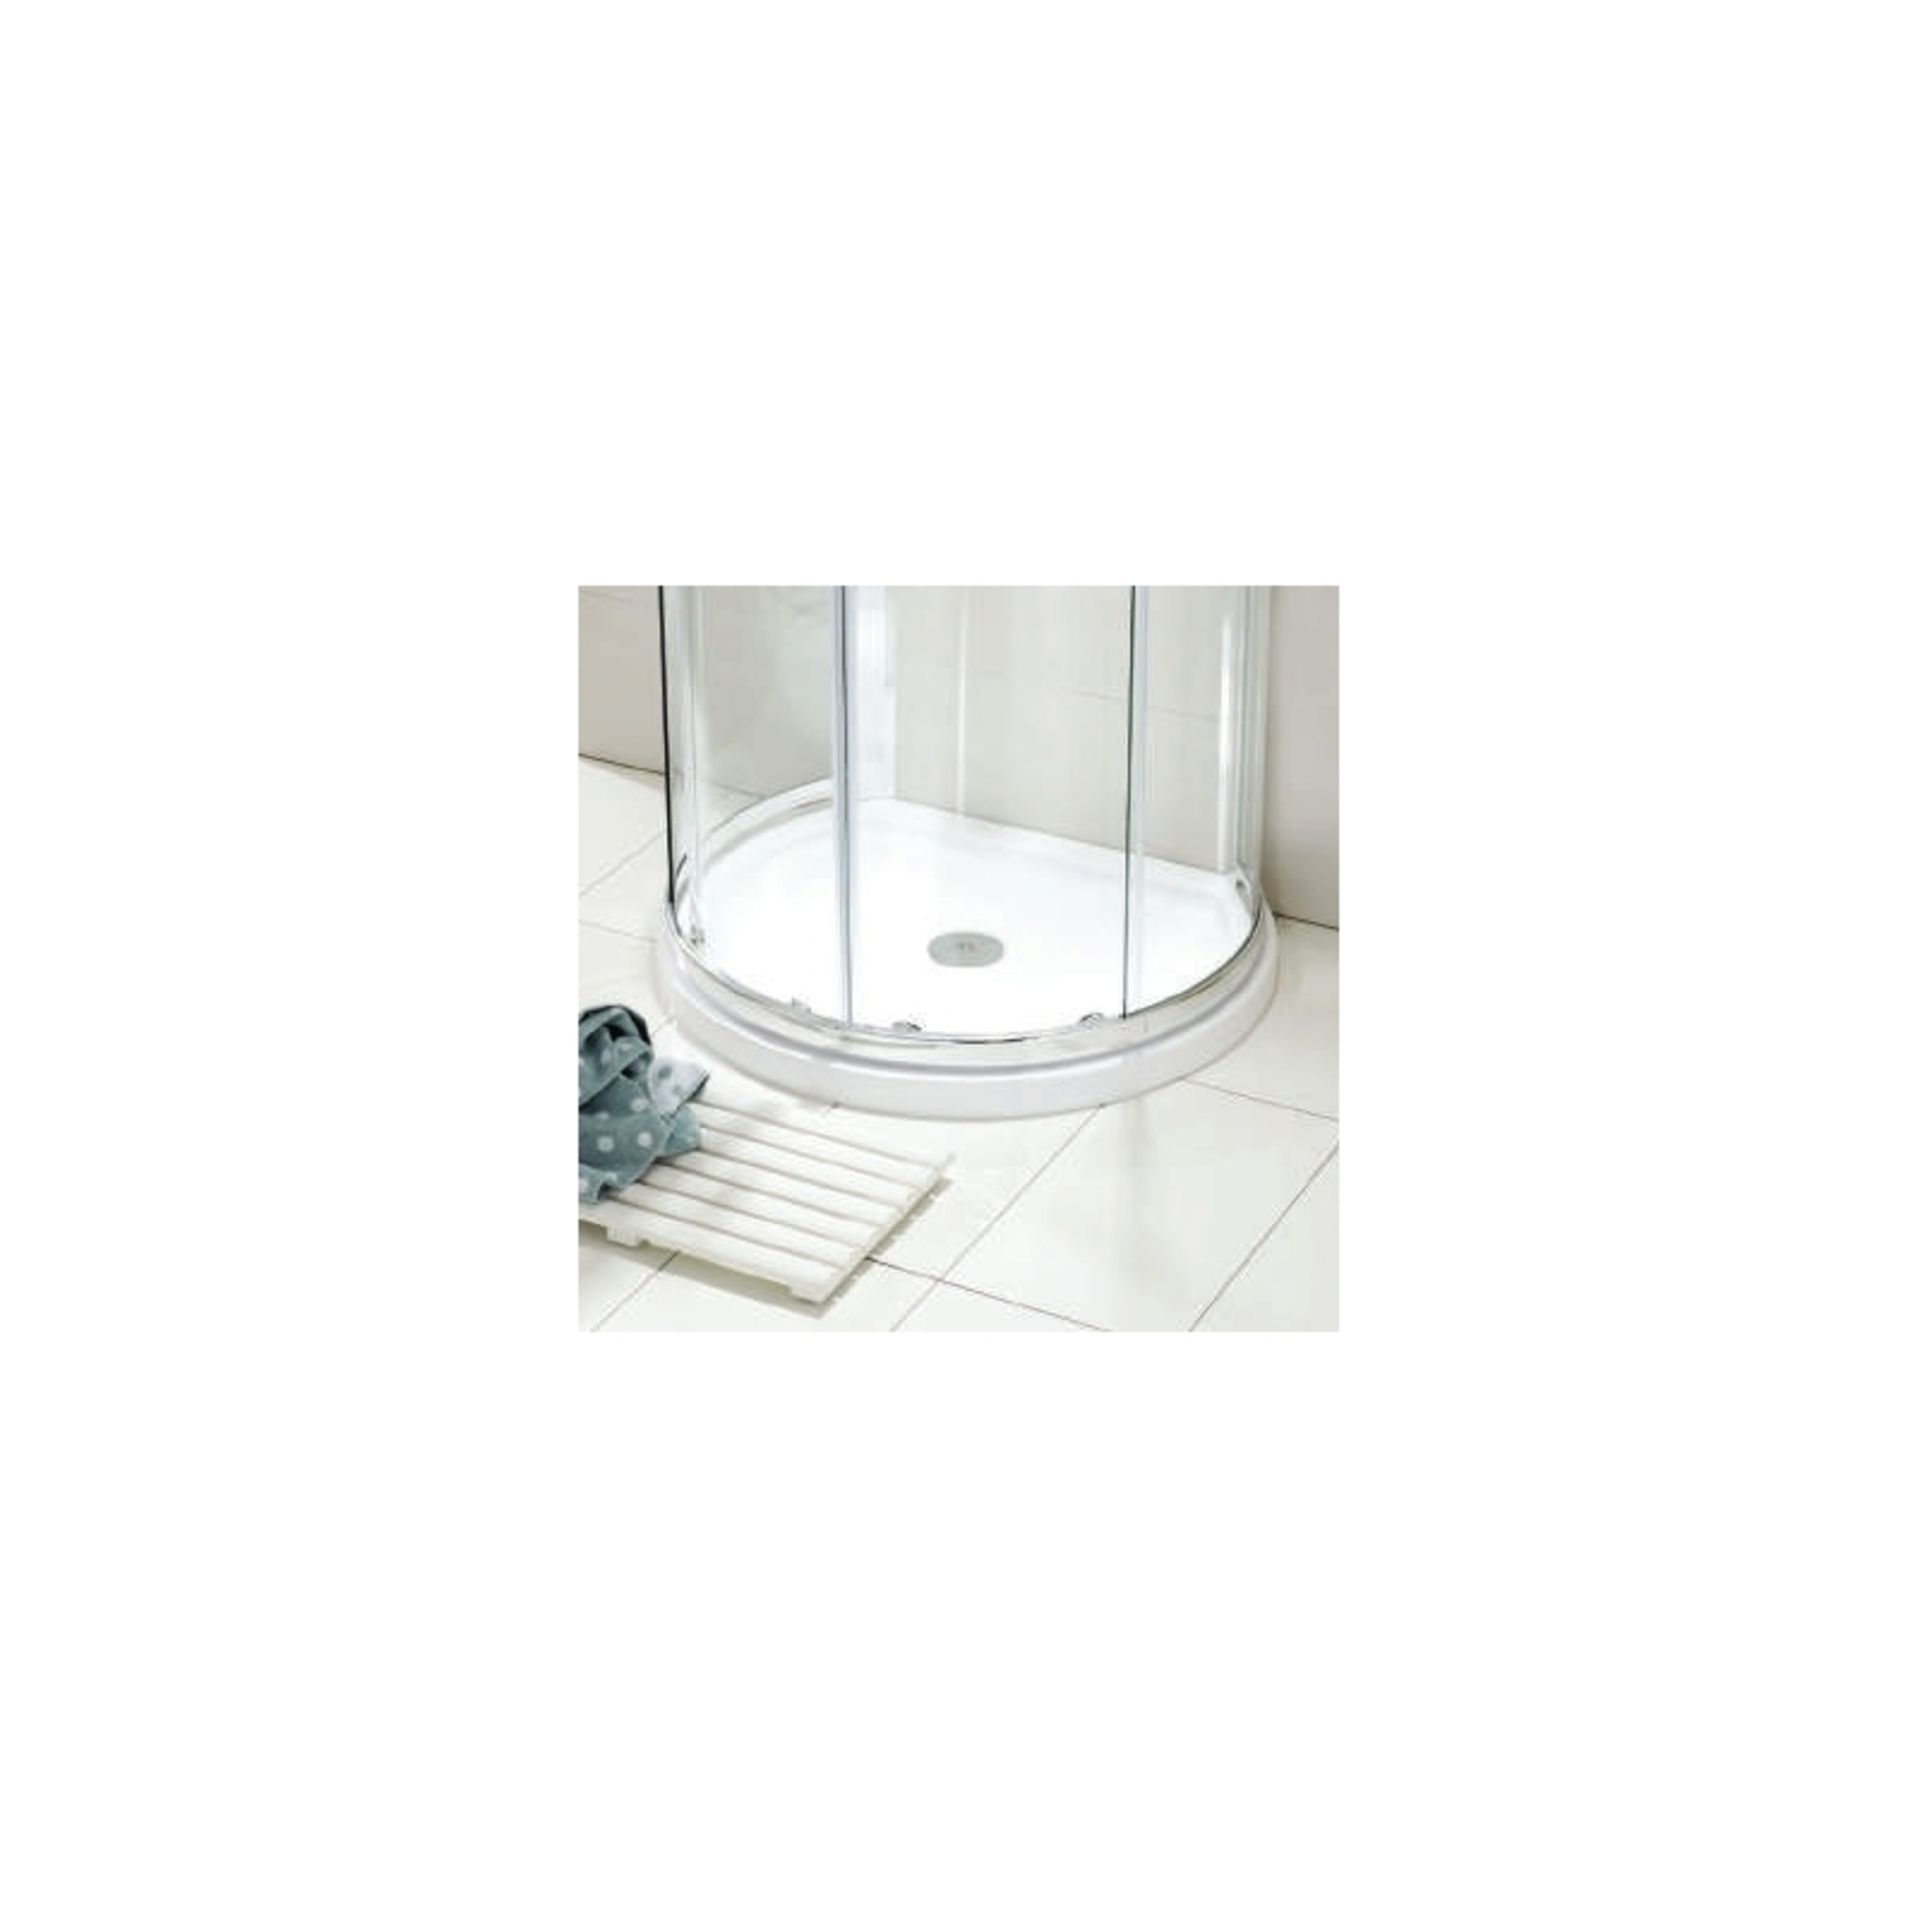 (PC41) Twyfords 770mm Hydro D Shape White Shower tray.Low profile ultra slim design Gel coated ... - Image 2 of 3